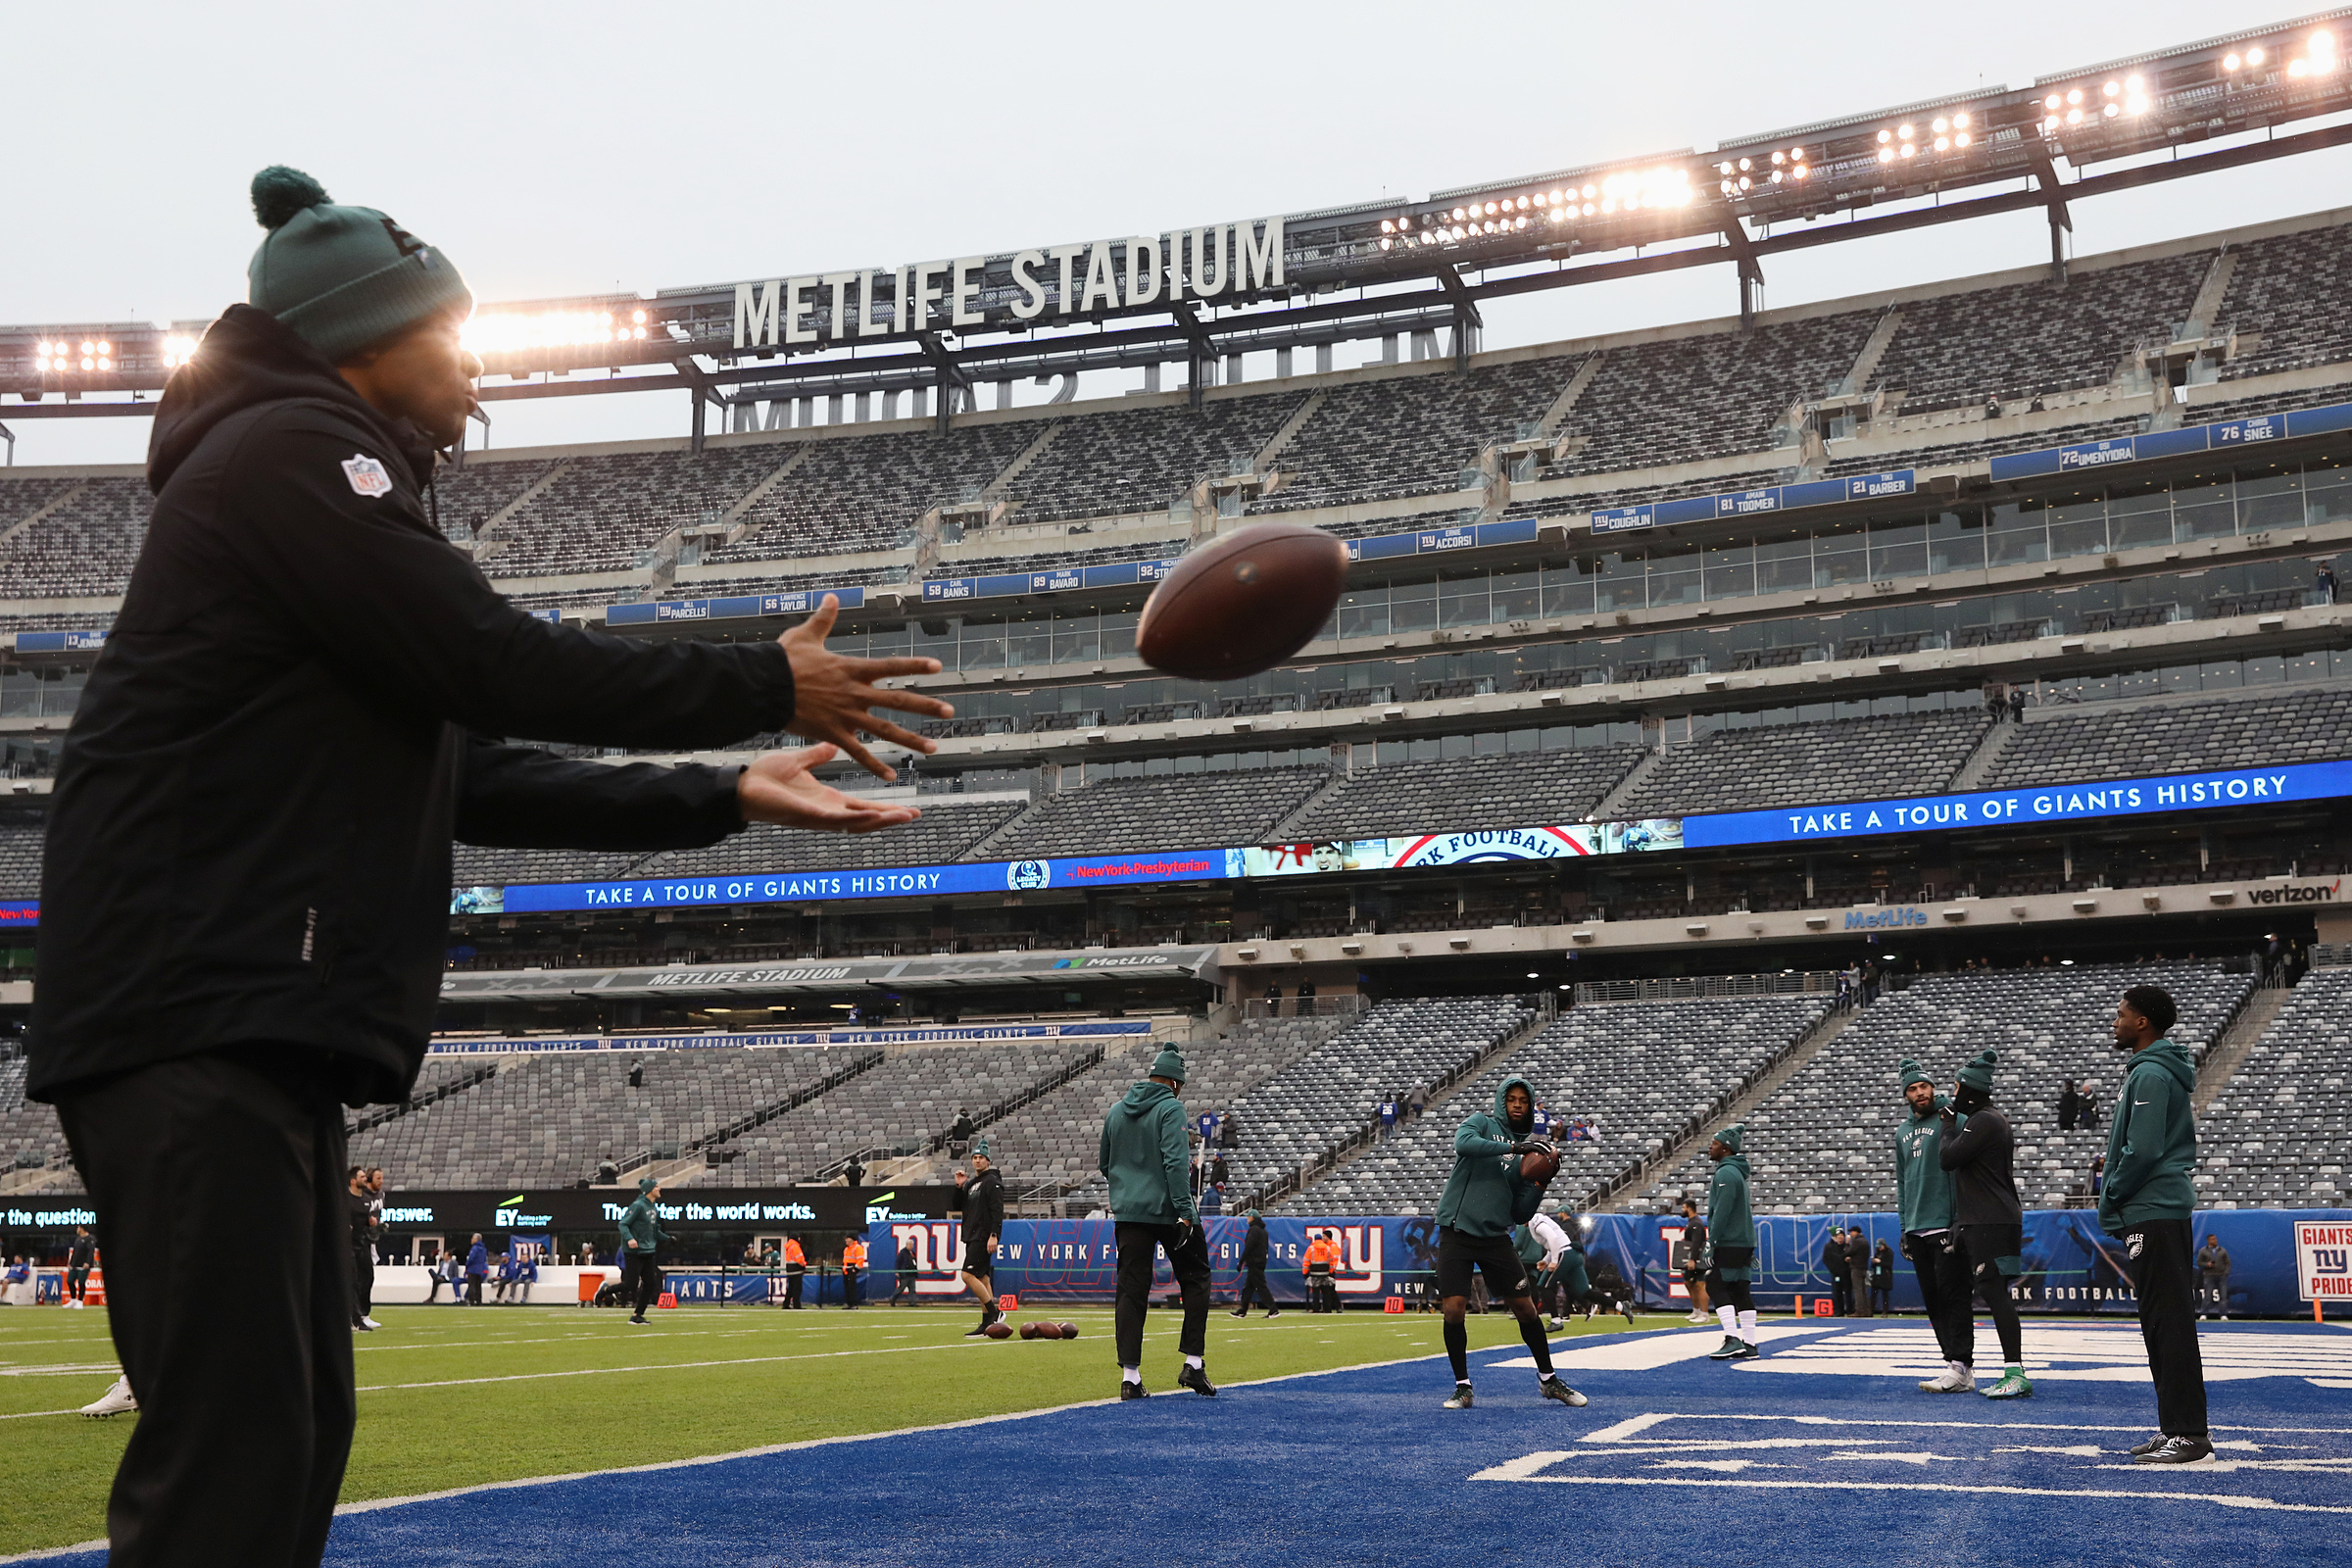 New York Jets announce gameday safety protocols at MetLife Stadium